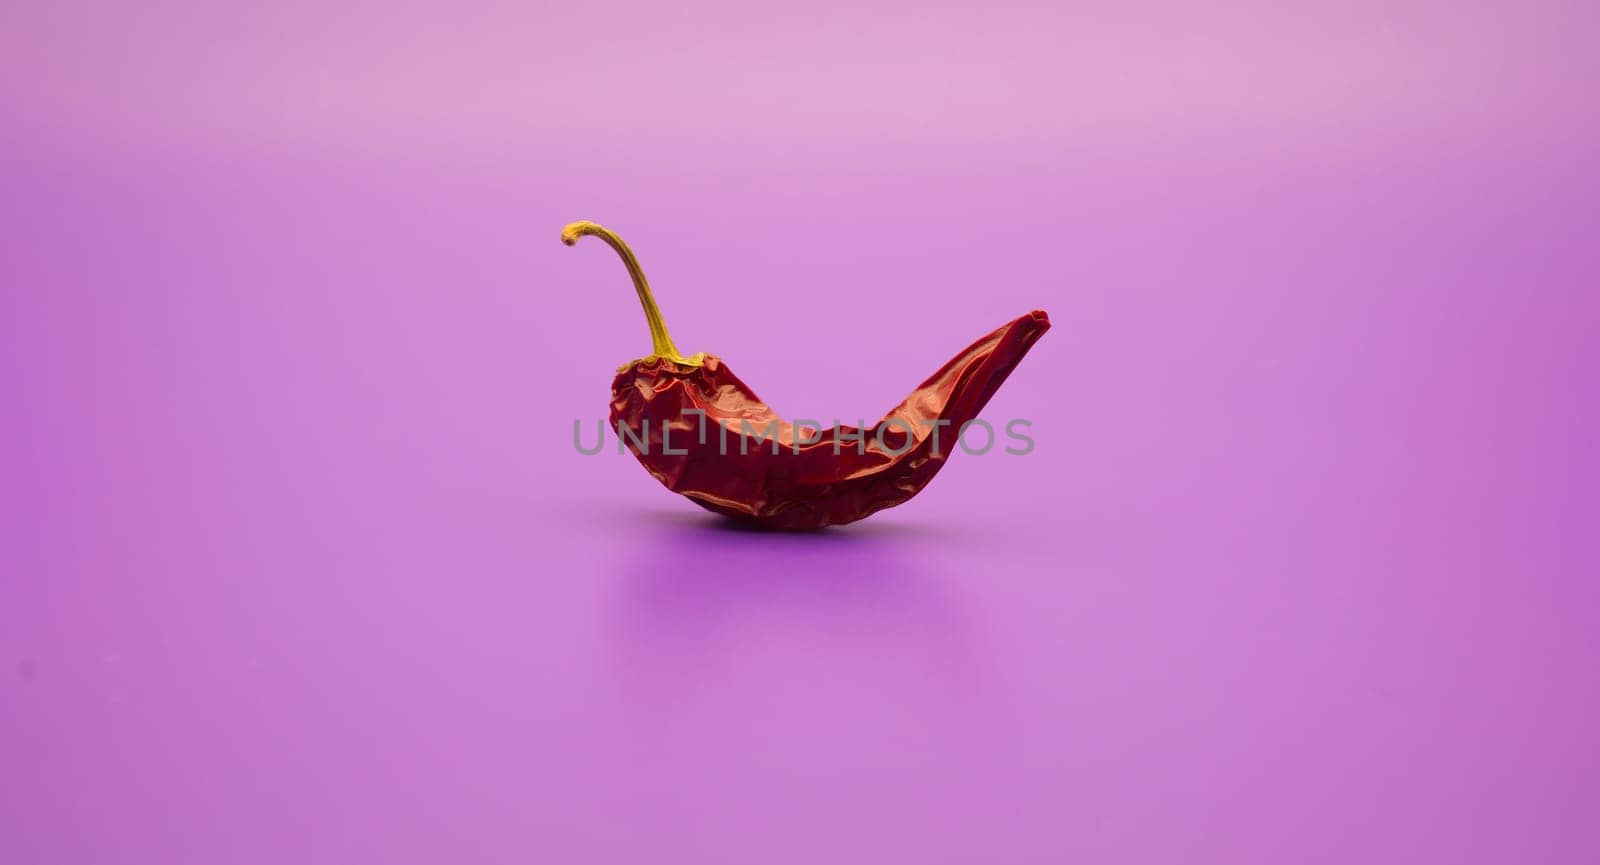 Dried red chili peppers with green stem presented against a vivid lilac color background